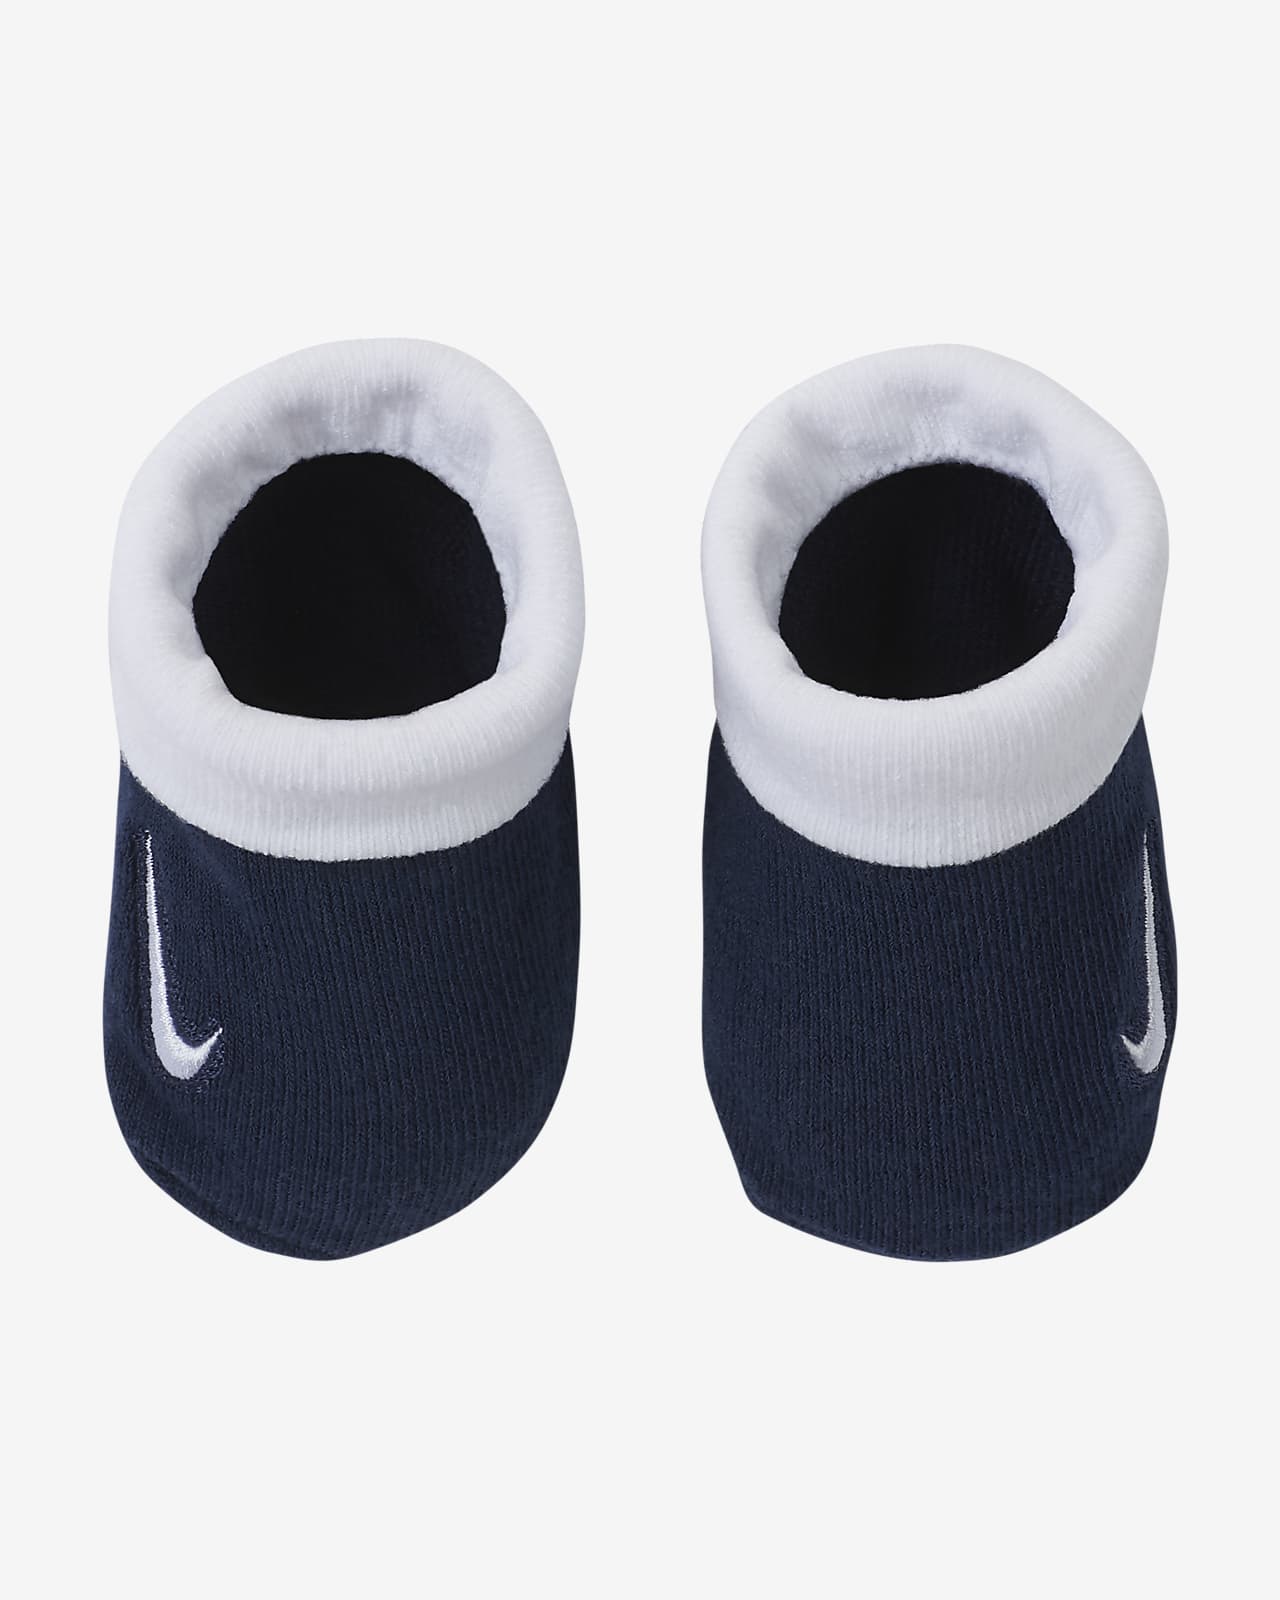 nike baby hat and booties